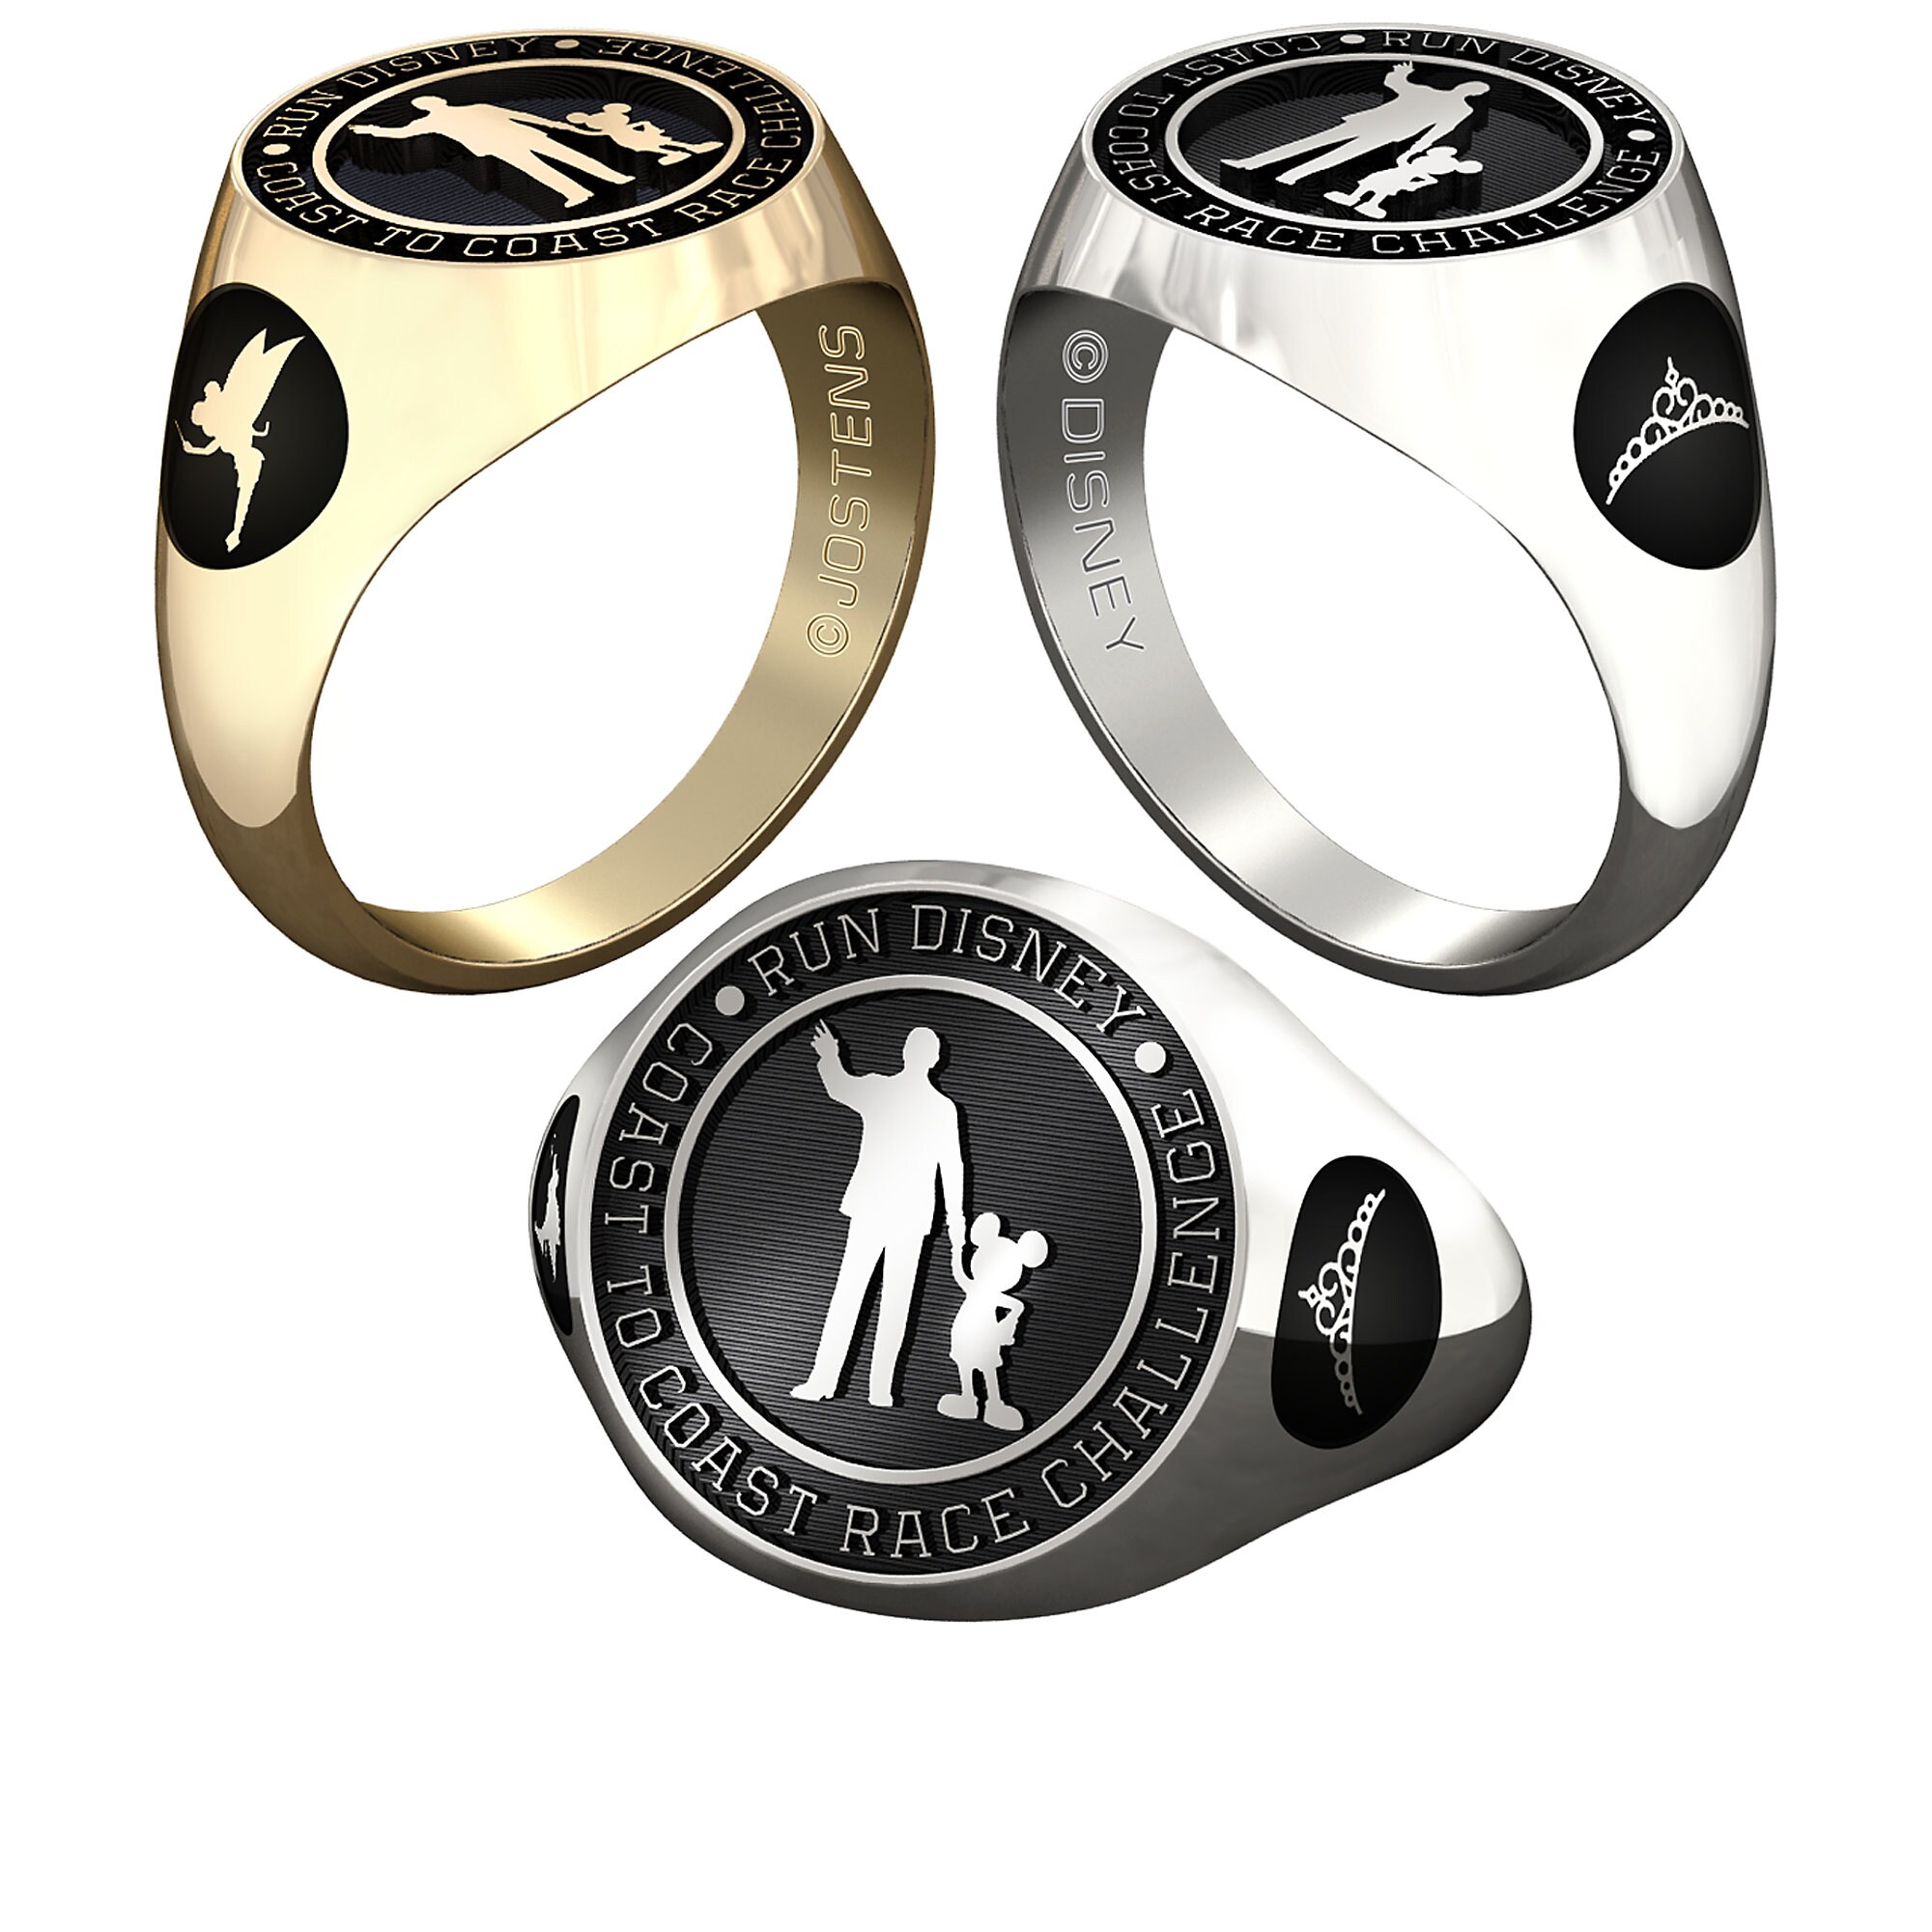 Tinker Bell and Princess runDisney Ring for Women by Jostens - Personalizable